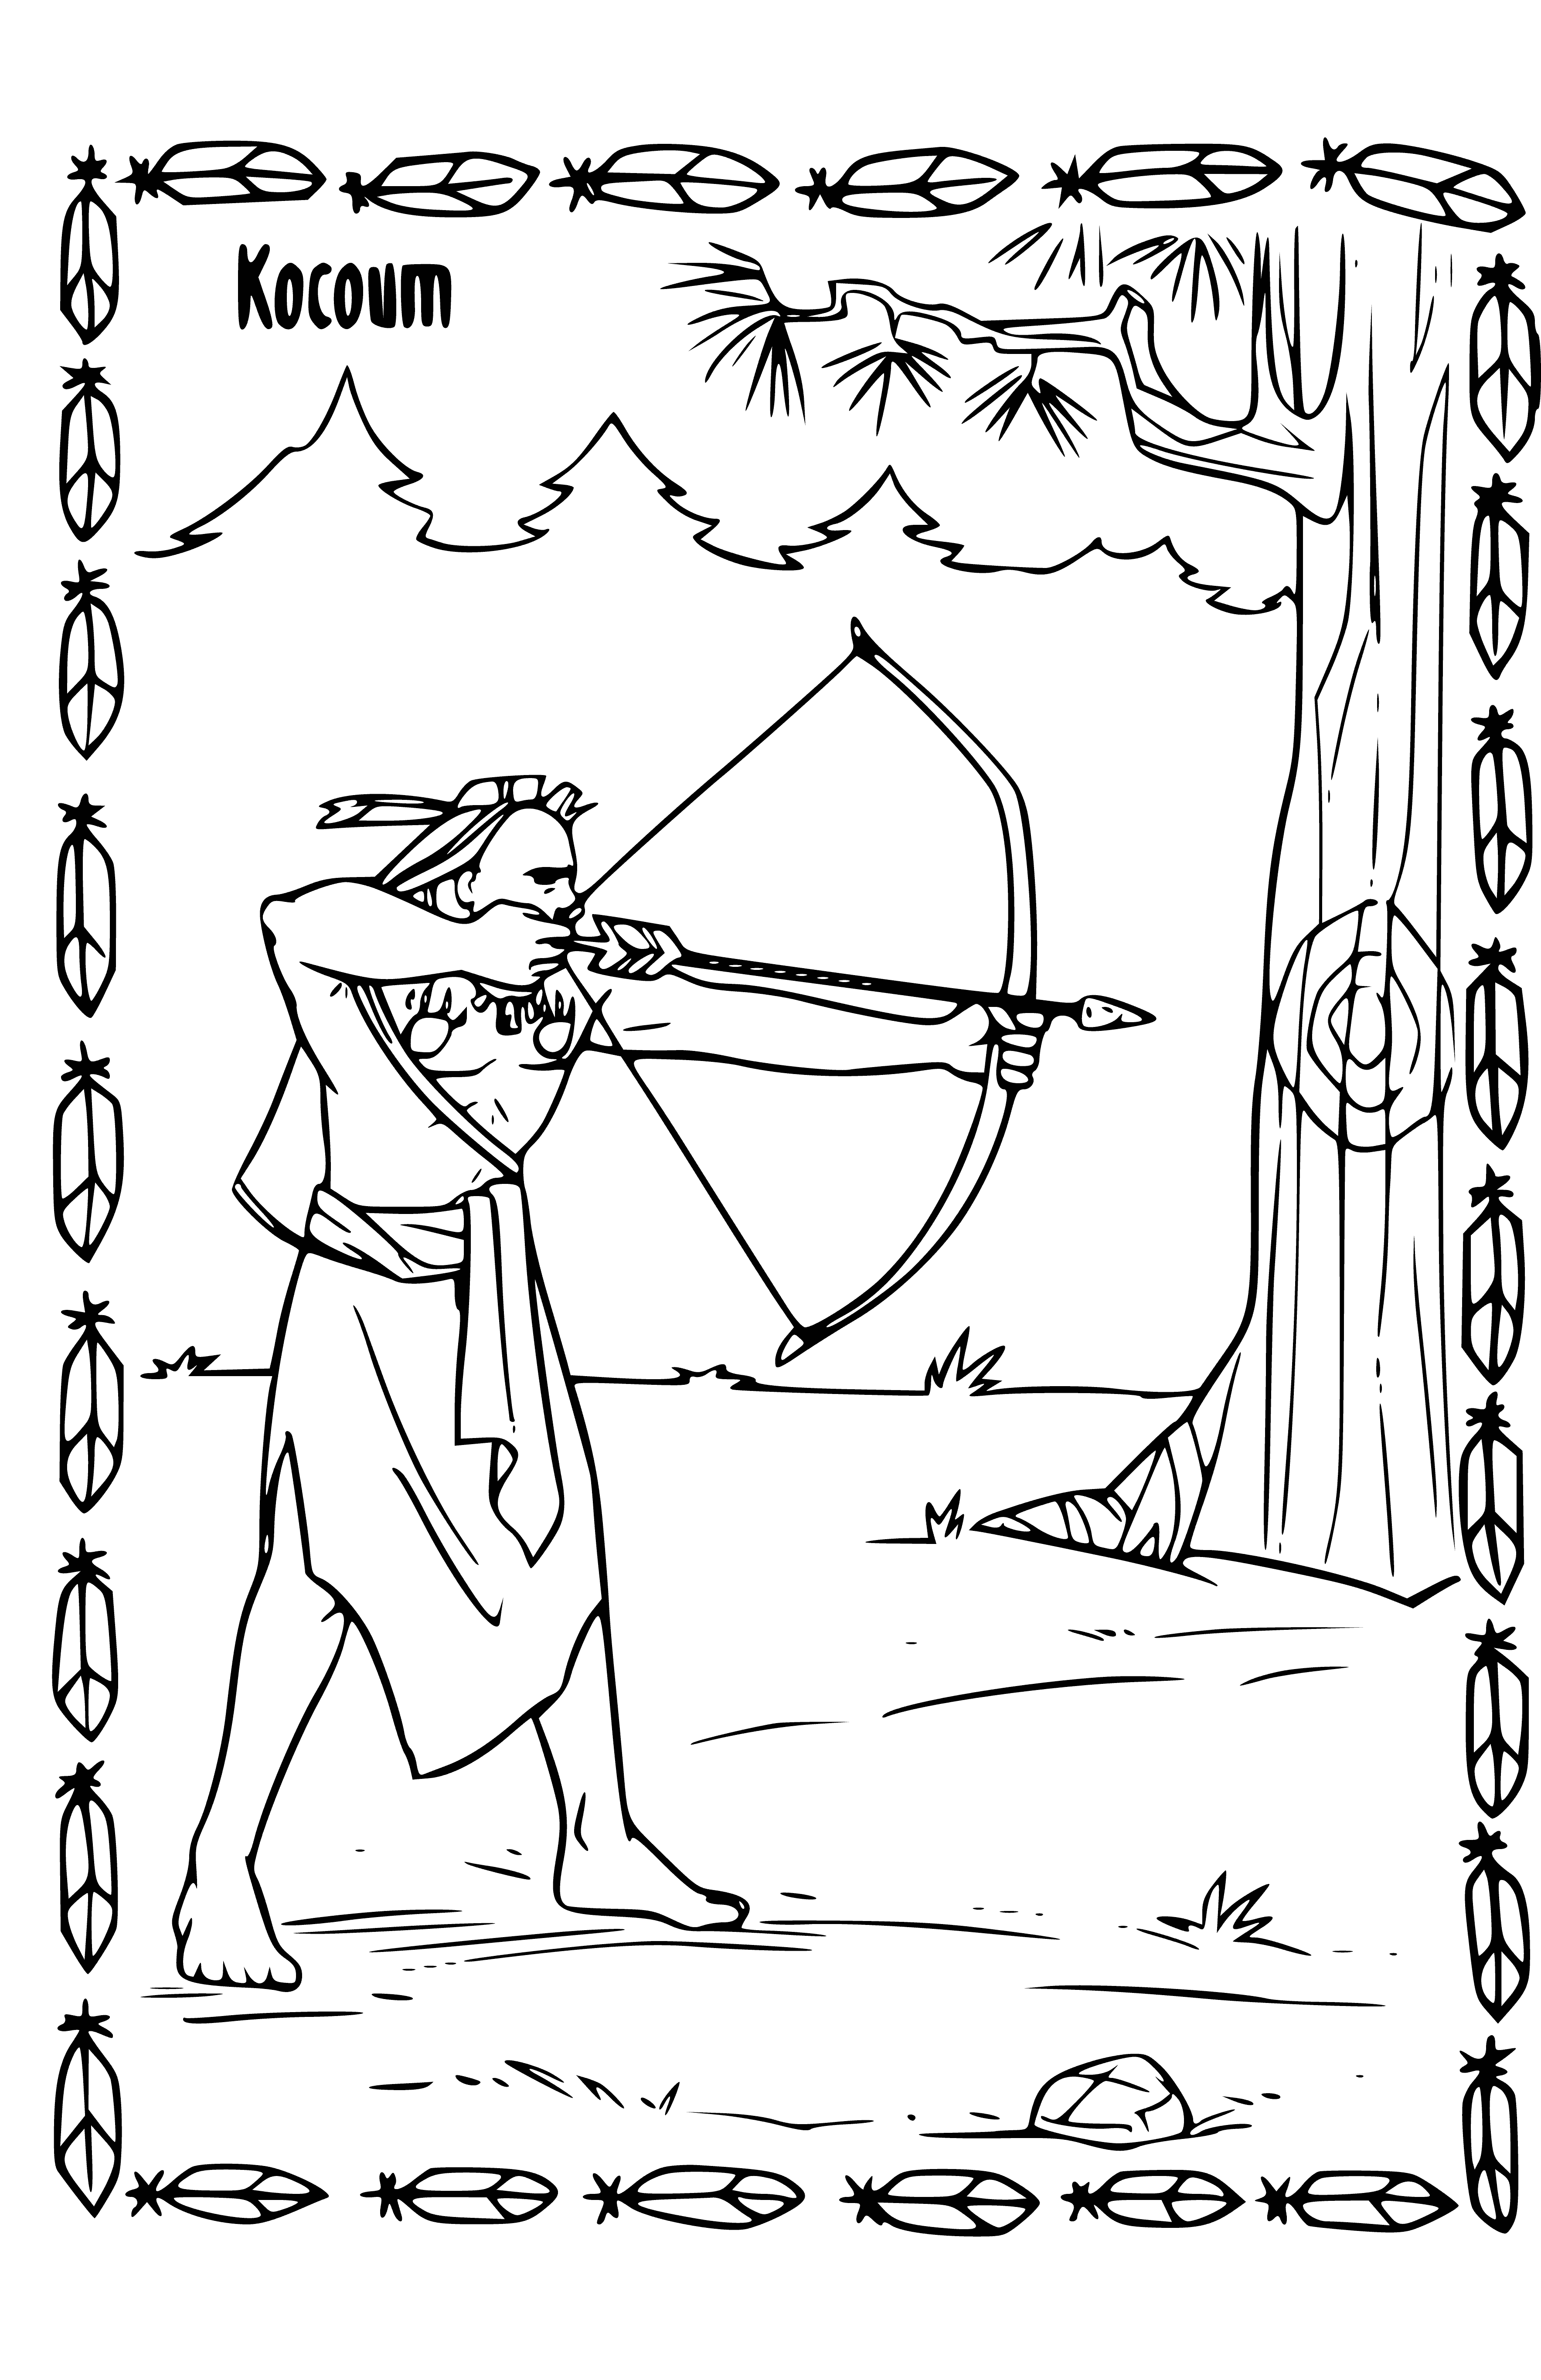 Brother Pocahontas coloring page